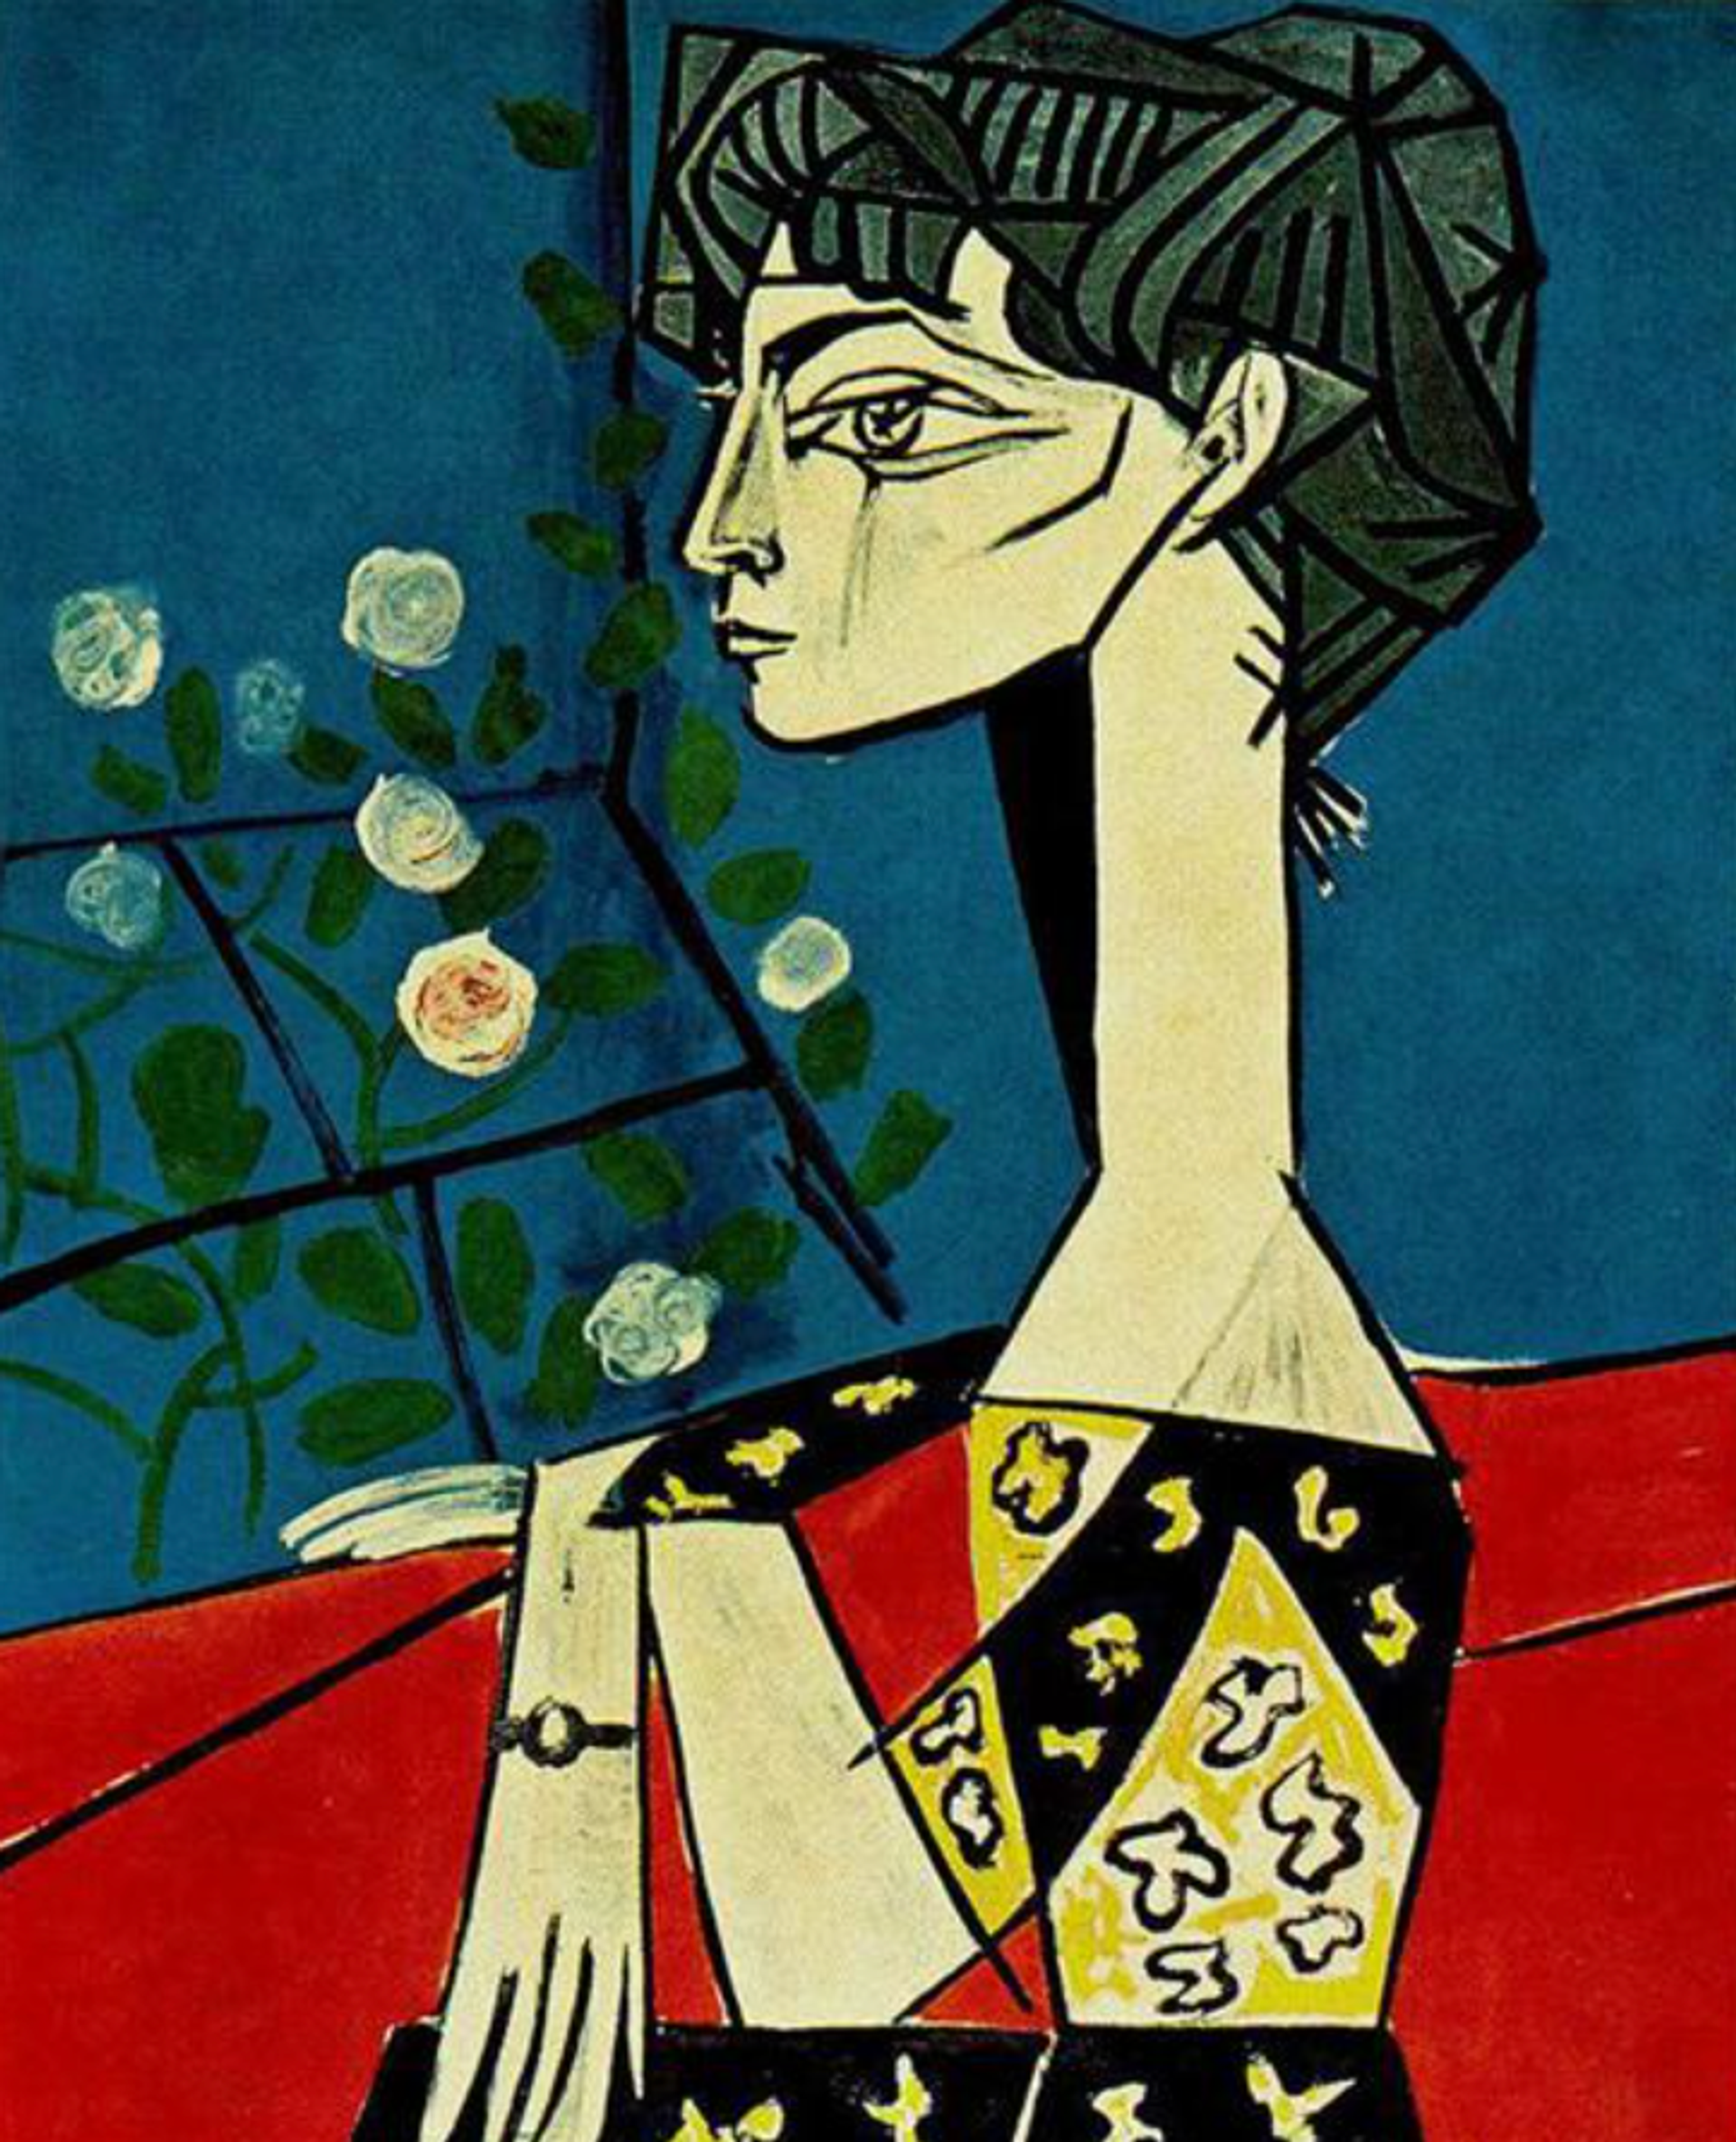 Painted portrait by Pablo Picasso of his wife, Jaqueline Roque. The painting showcases a geometric deconstruction of Jacqueline's figure, alongside a bouquet of delicate roses, using bold lines and rich, contrasting colours to evoke a sense of vibrancy and movement.